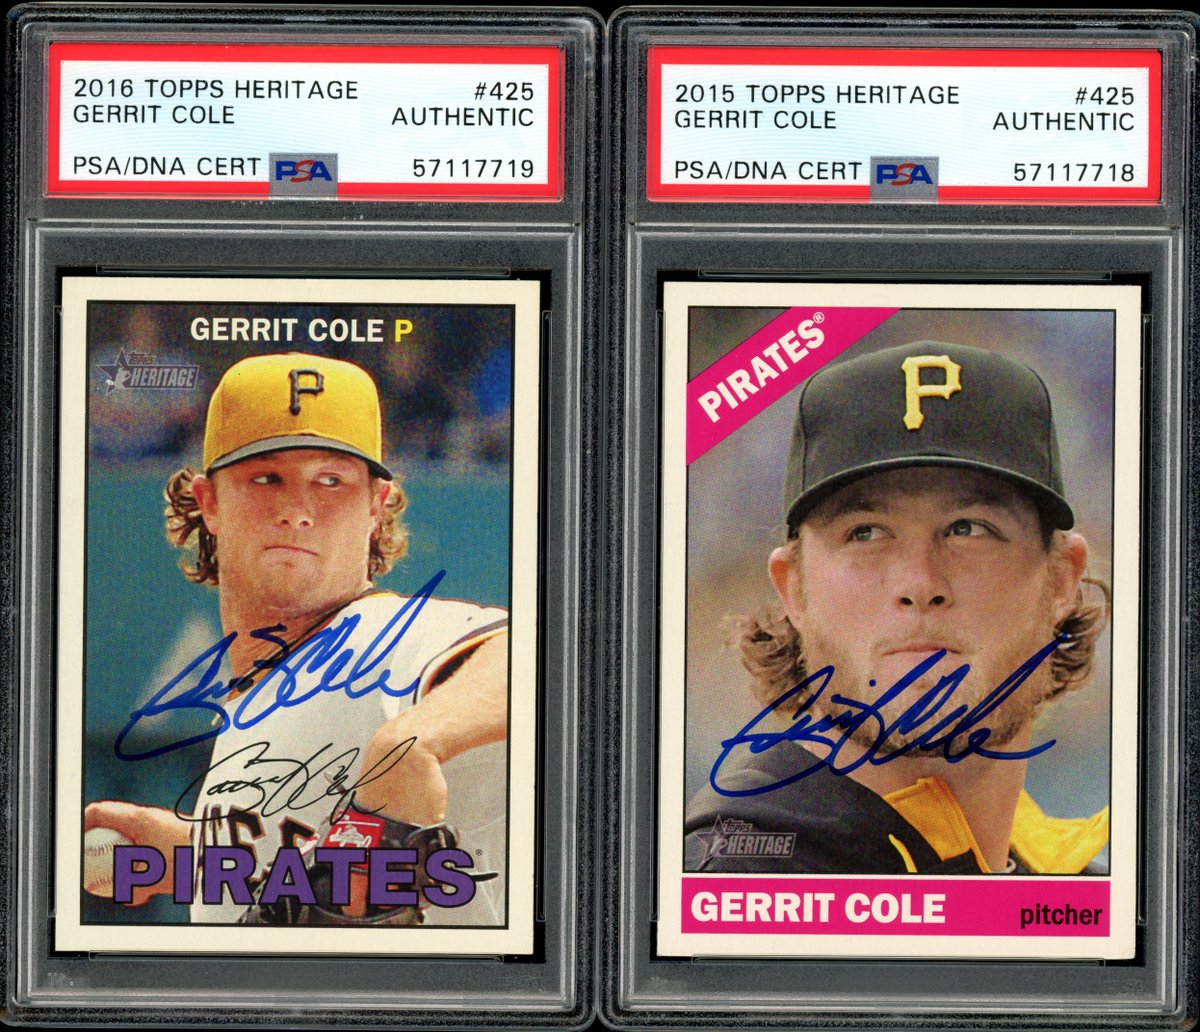 Gerrit Cole Heritage Autos

75$ shipped each or both for $130

@sports_sell @Hobby_Connect @HobbyConnector @CardPurchaser https://t.co/ZW5wQs8e6O